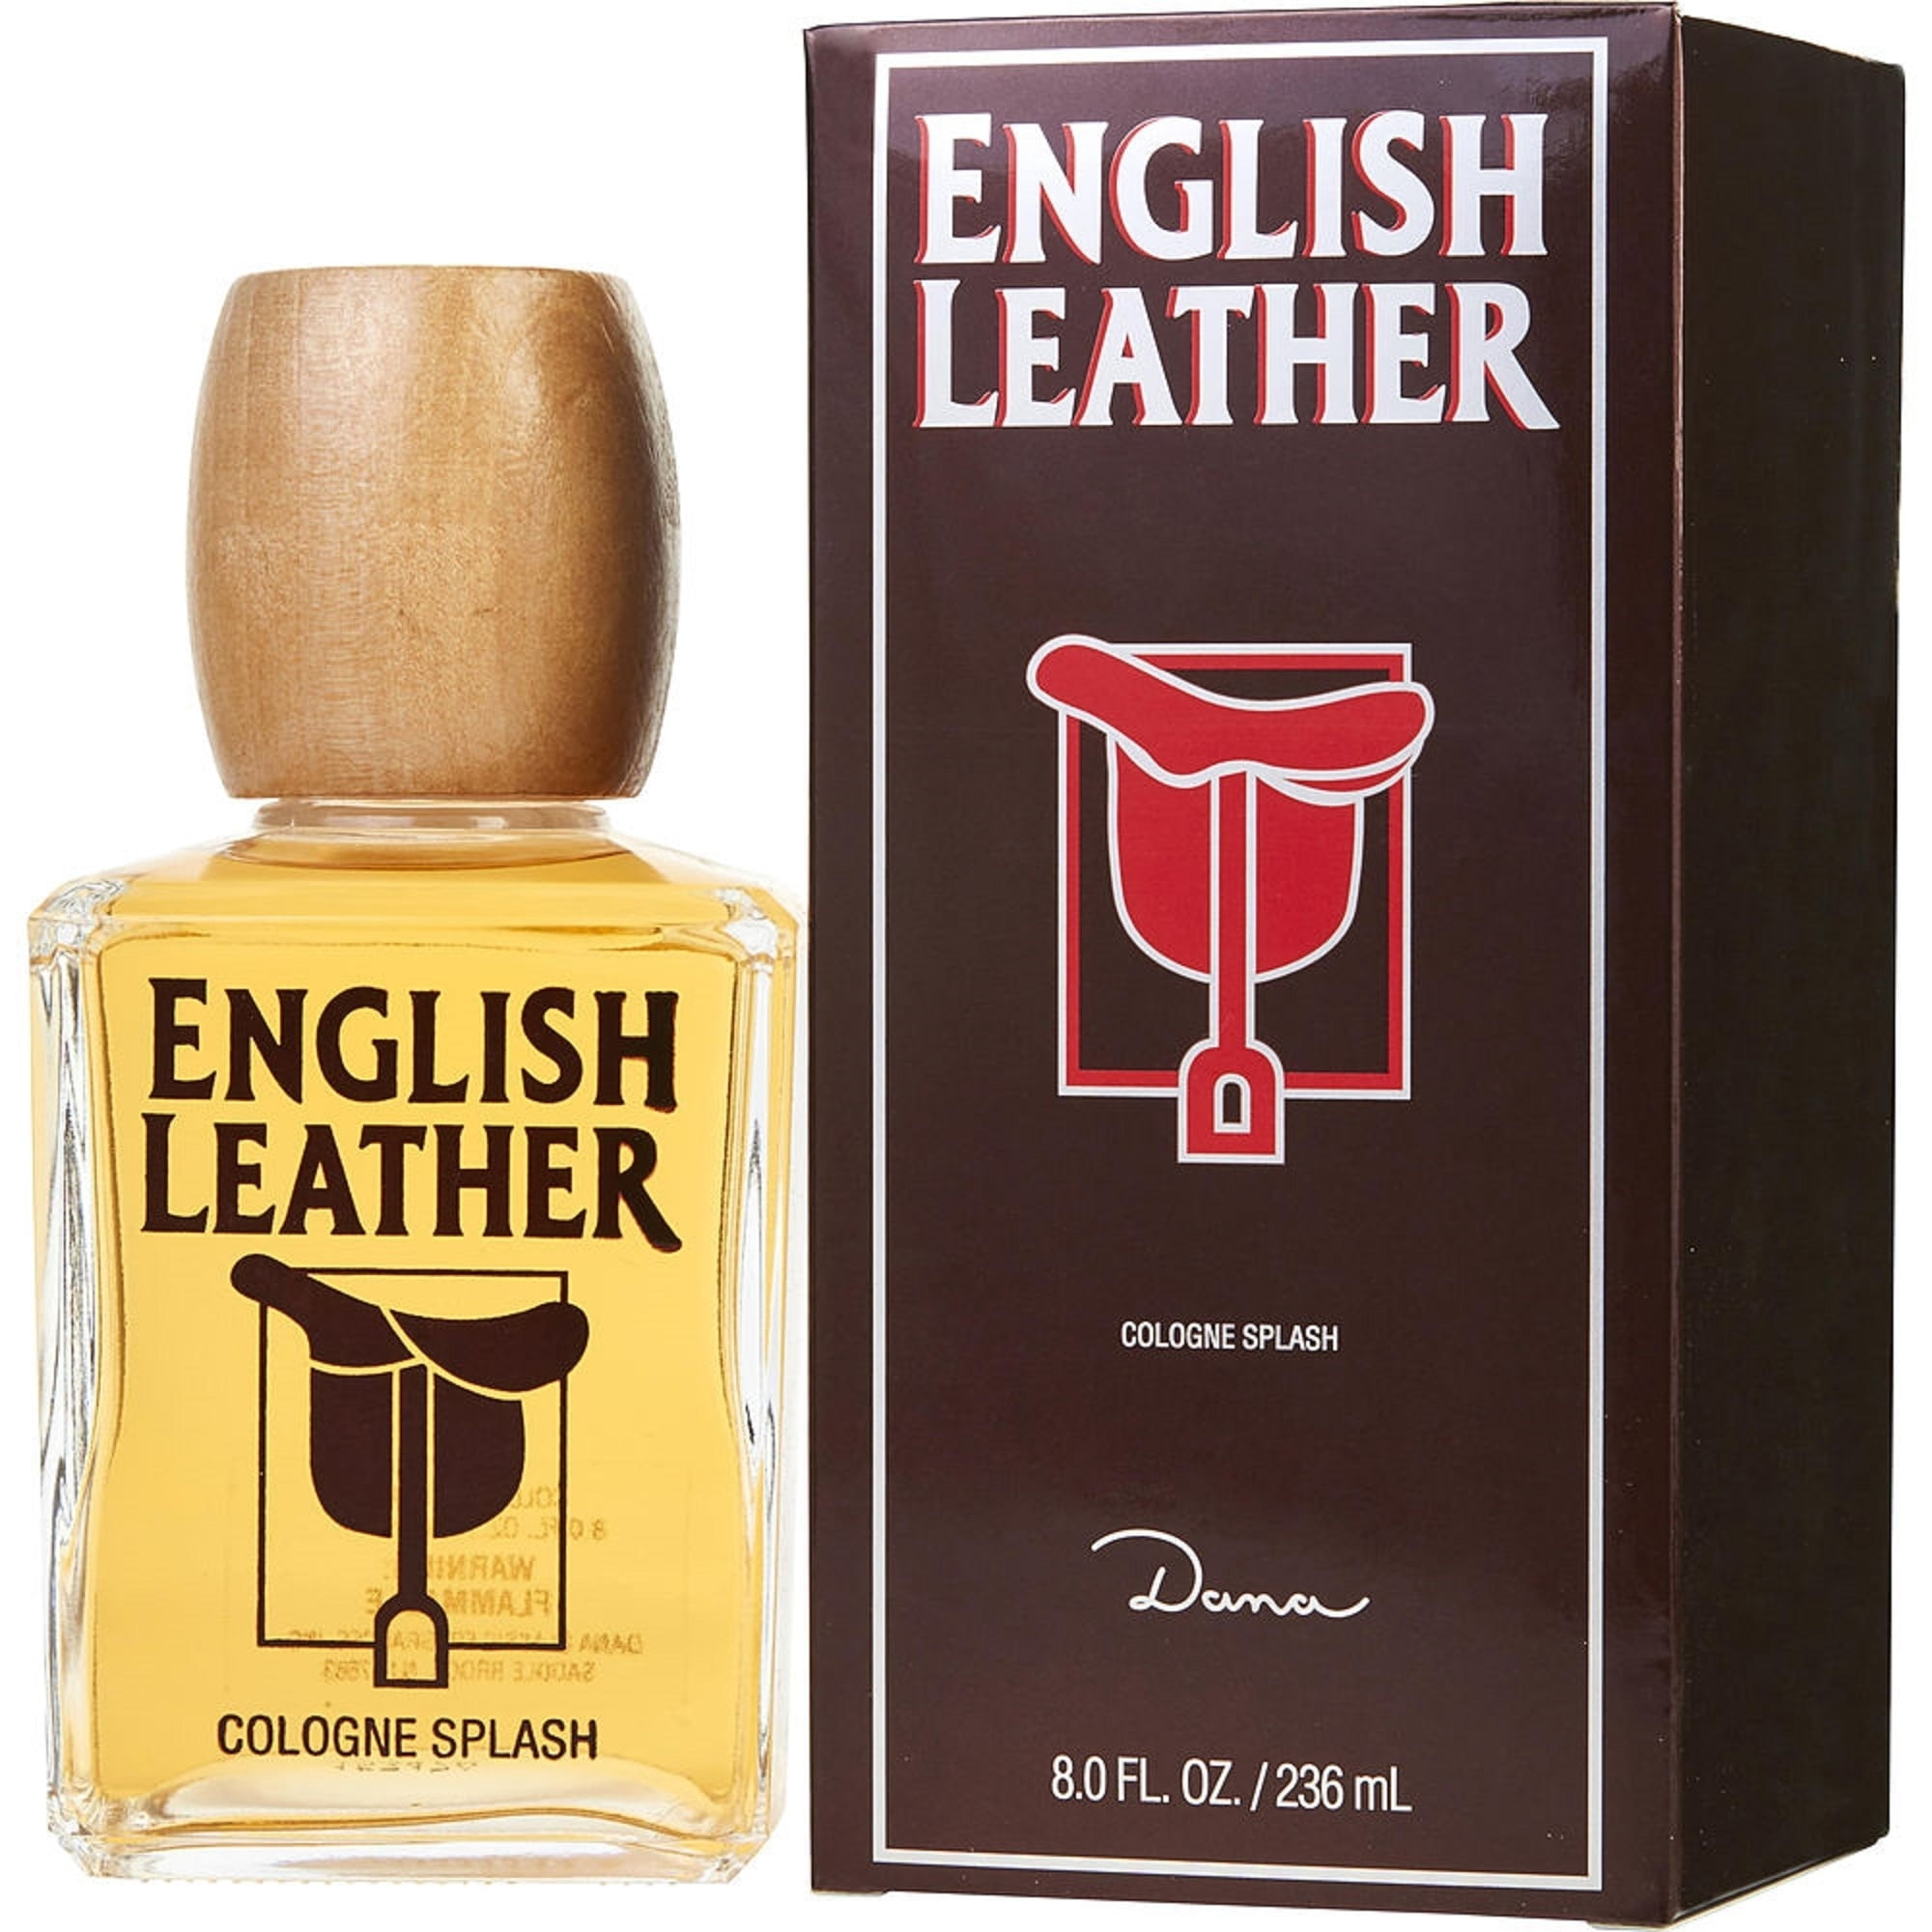 English Leather English Leather cologne - a fragrance for men 1949